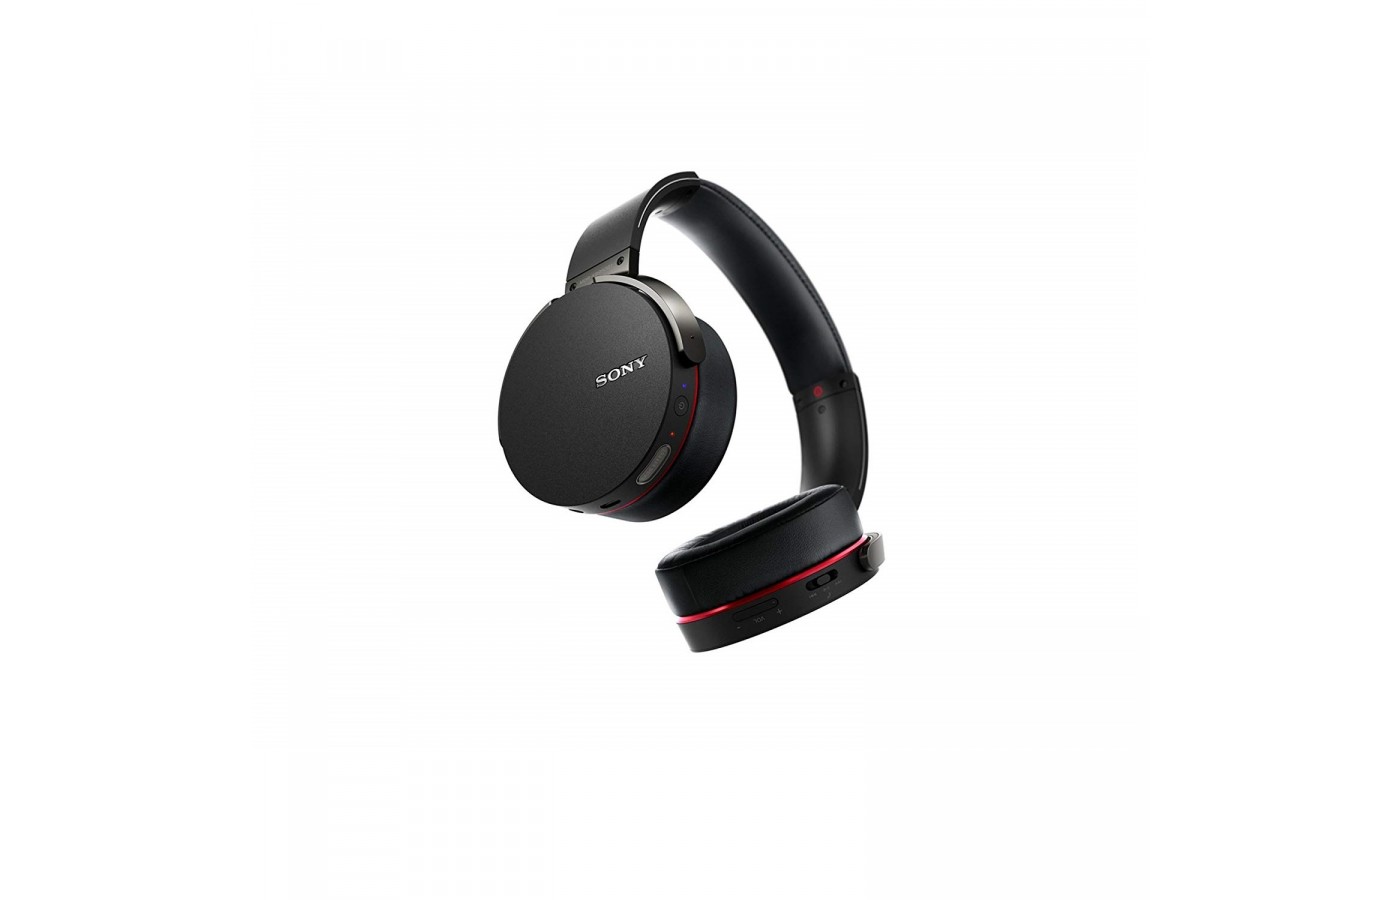 The Sony XB950B1 comes in matte black, blue or red.